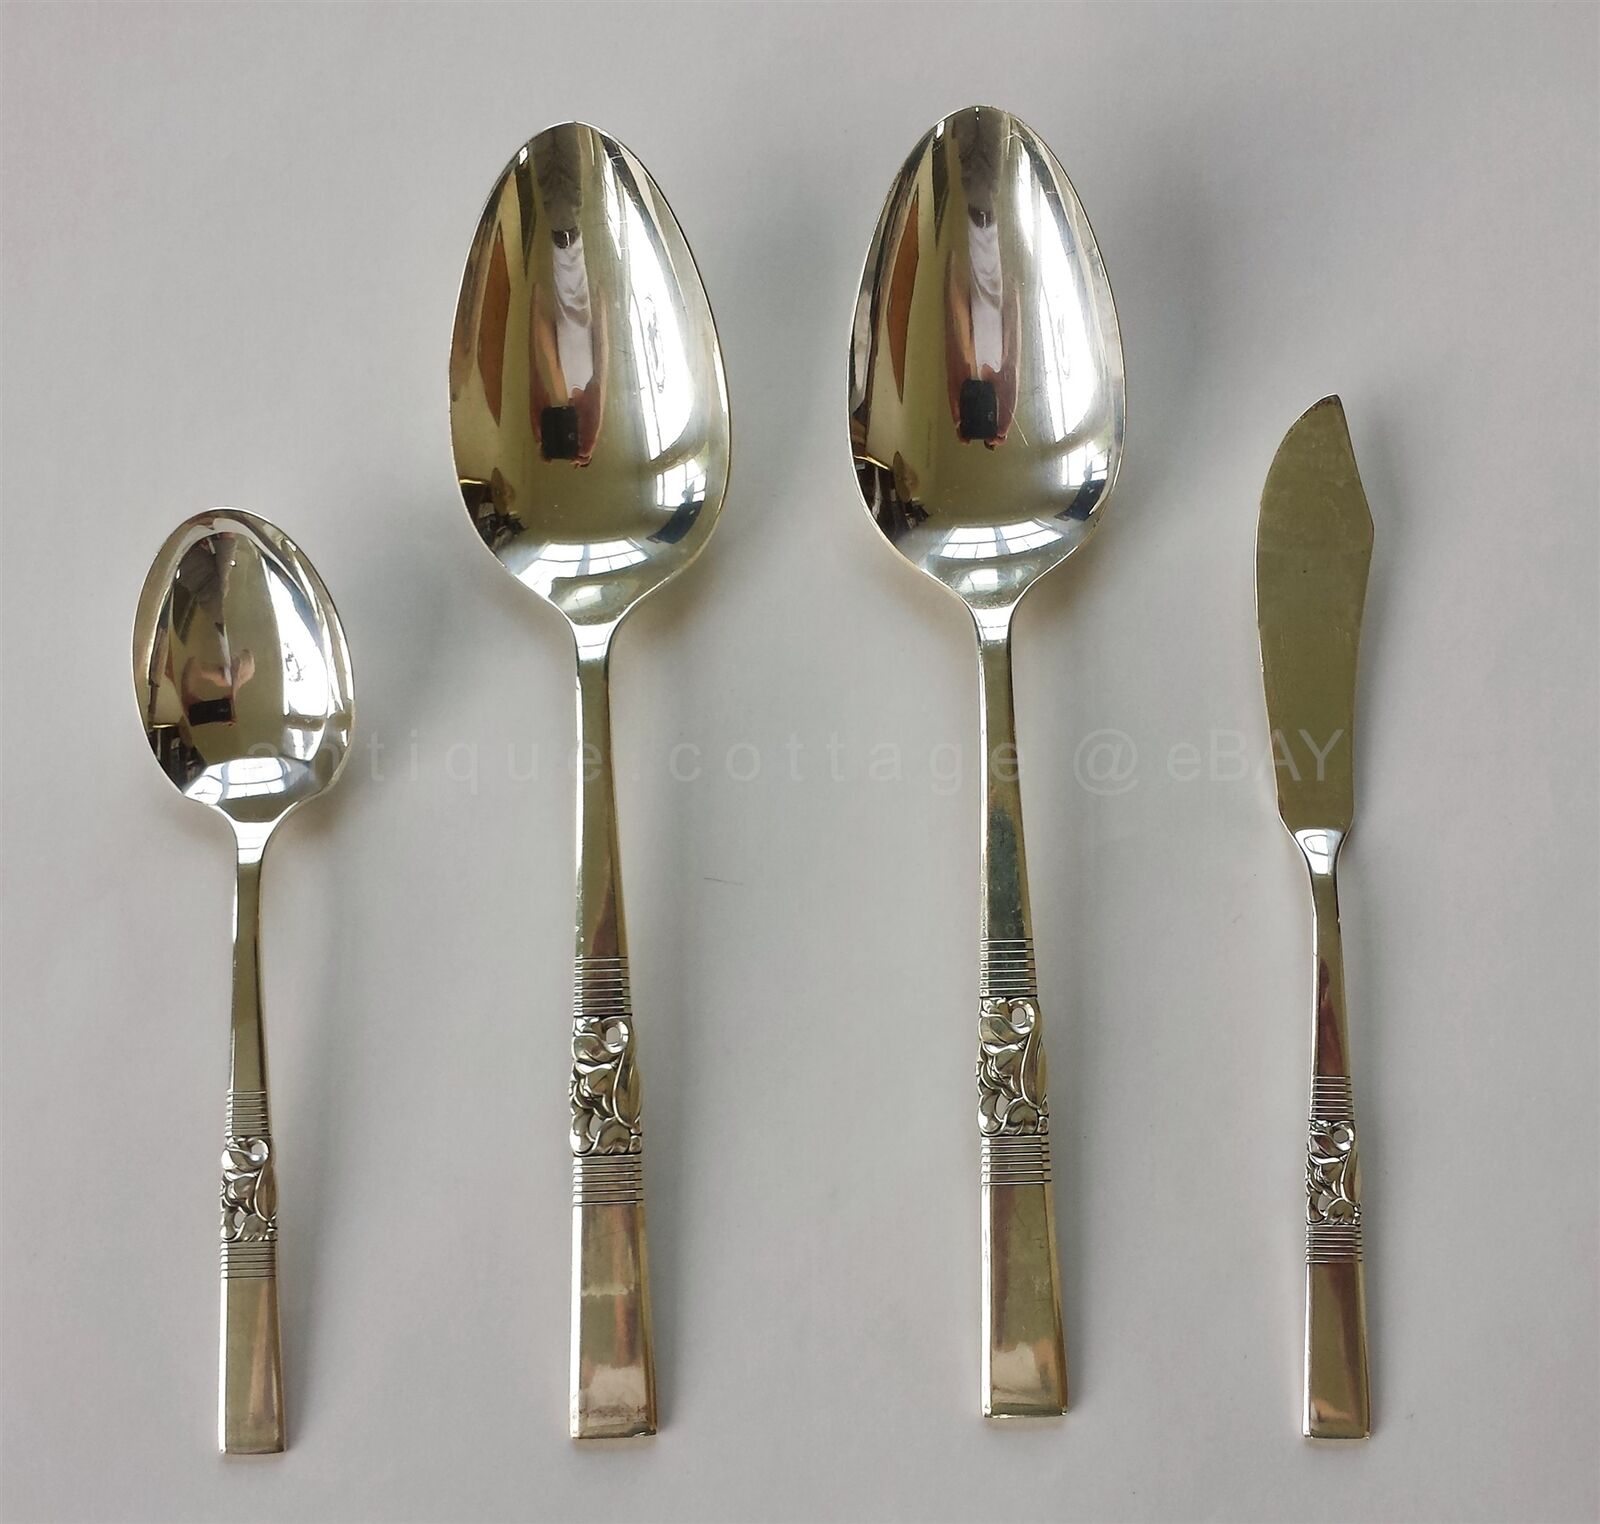 1948 antique COMMUNITY MORNING STAR silverplate flatware 4pc SERVING SPOON KNIFE